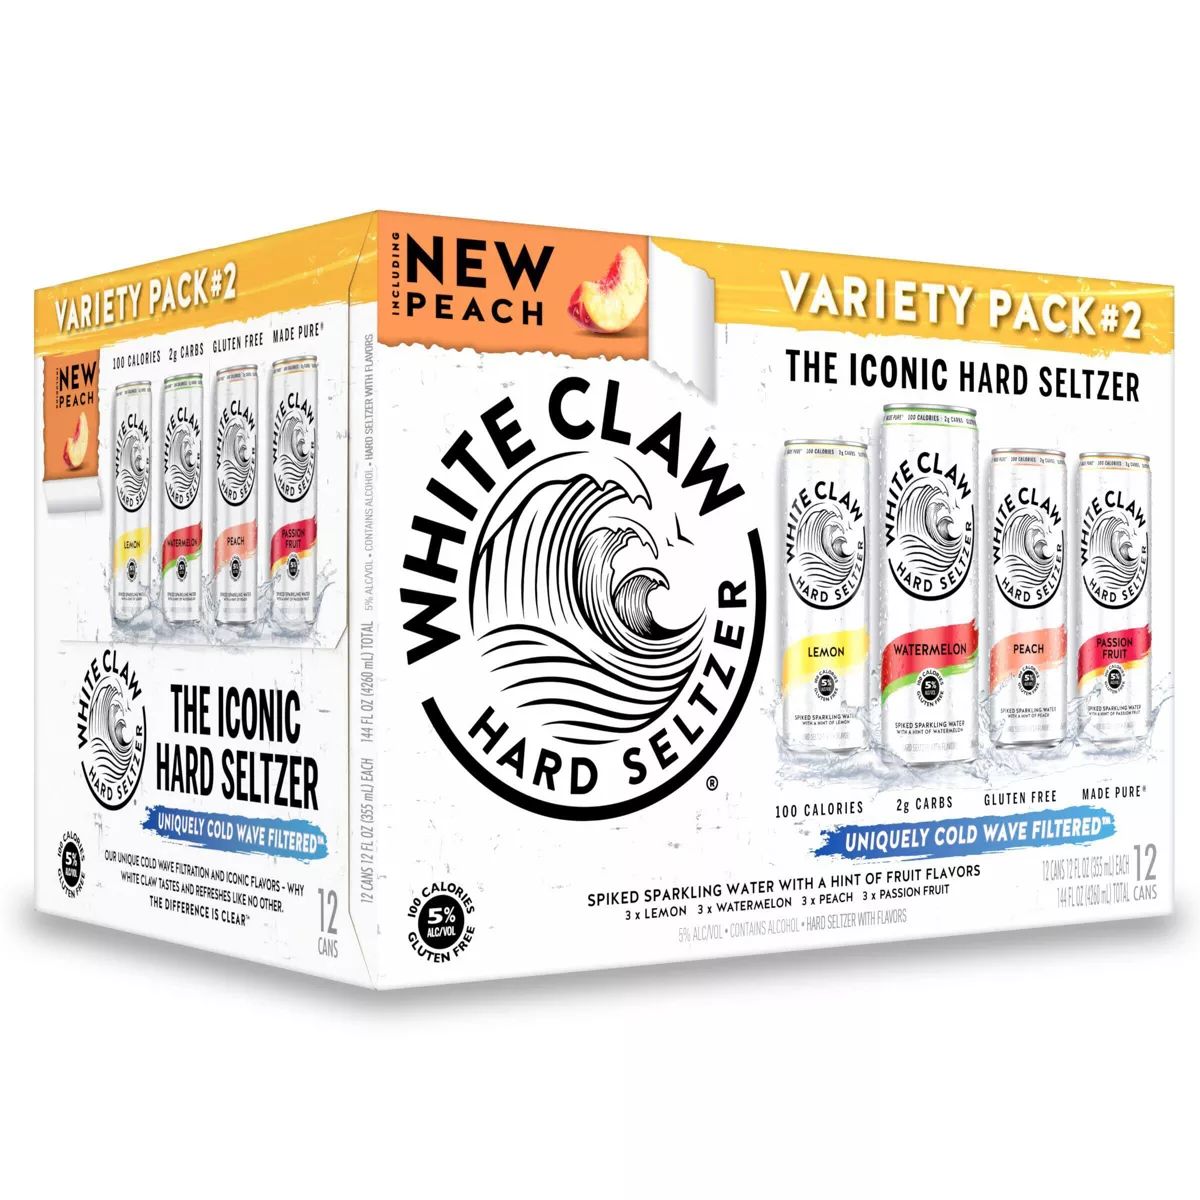 White Claw Hard Seltzer Variety Pack No. 2 - 12pk/12 fl oz Slim Cans | Target